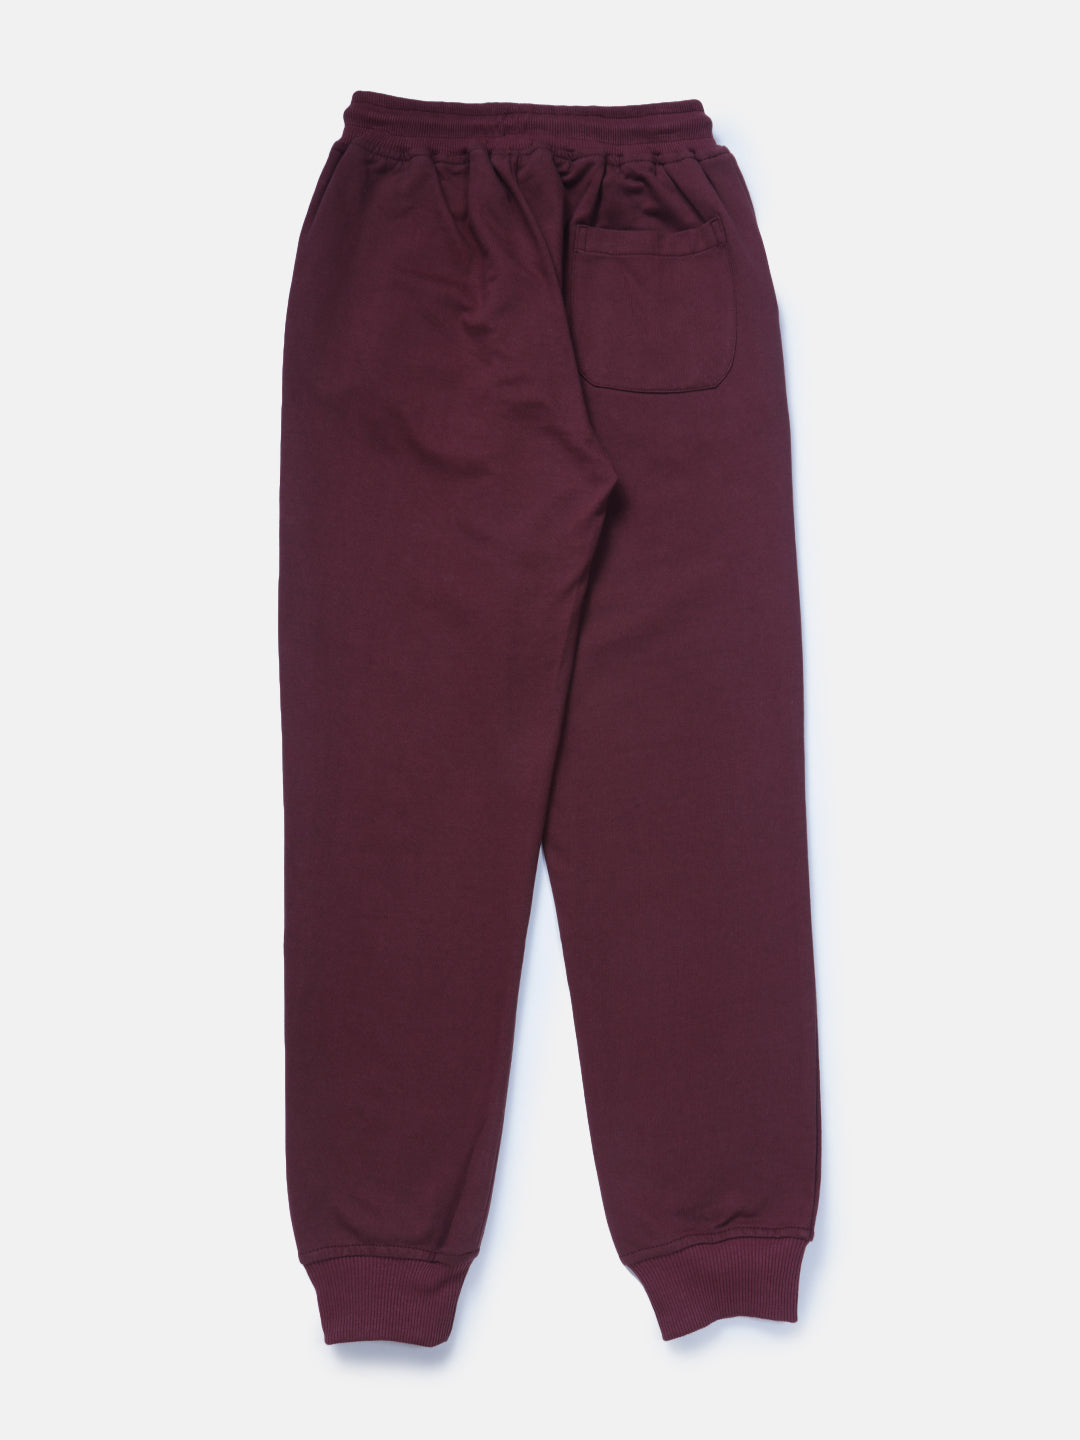 Boys Maroon Solid Knits Track Pant